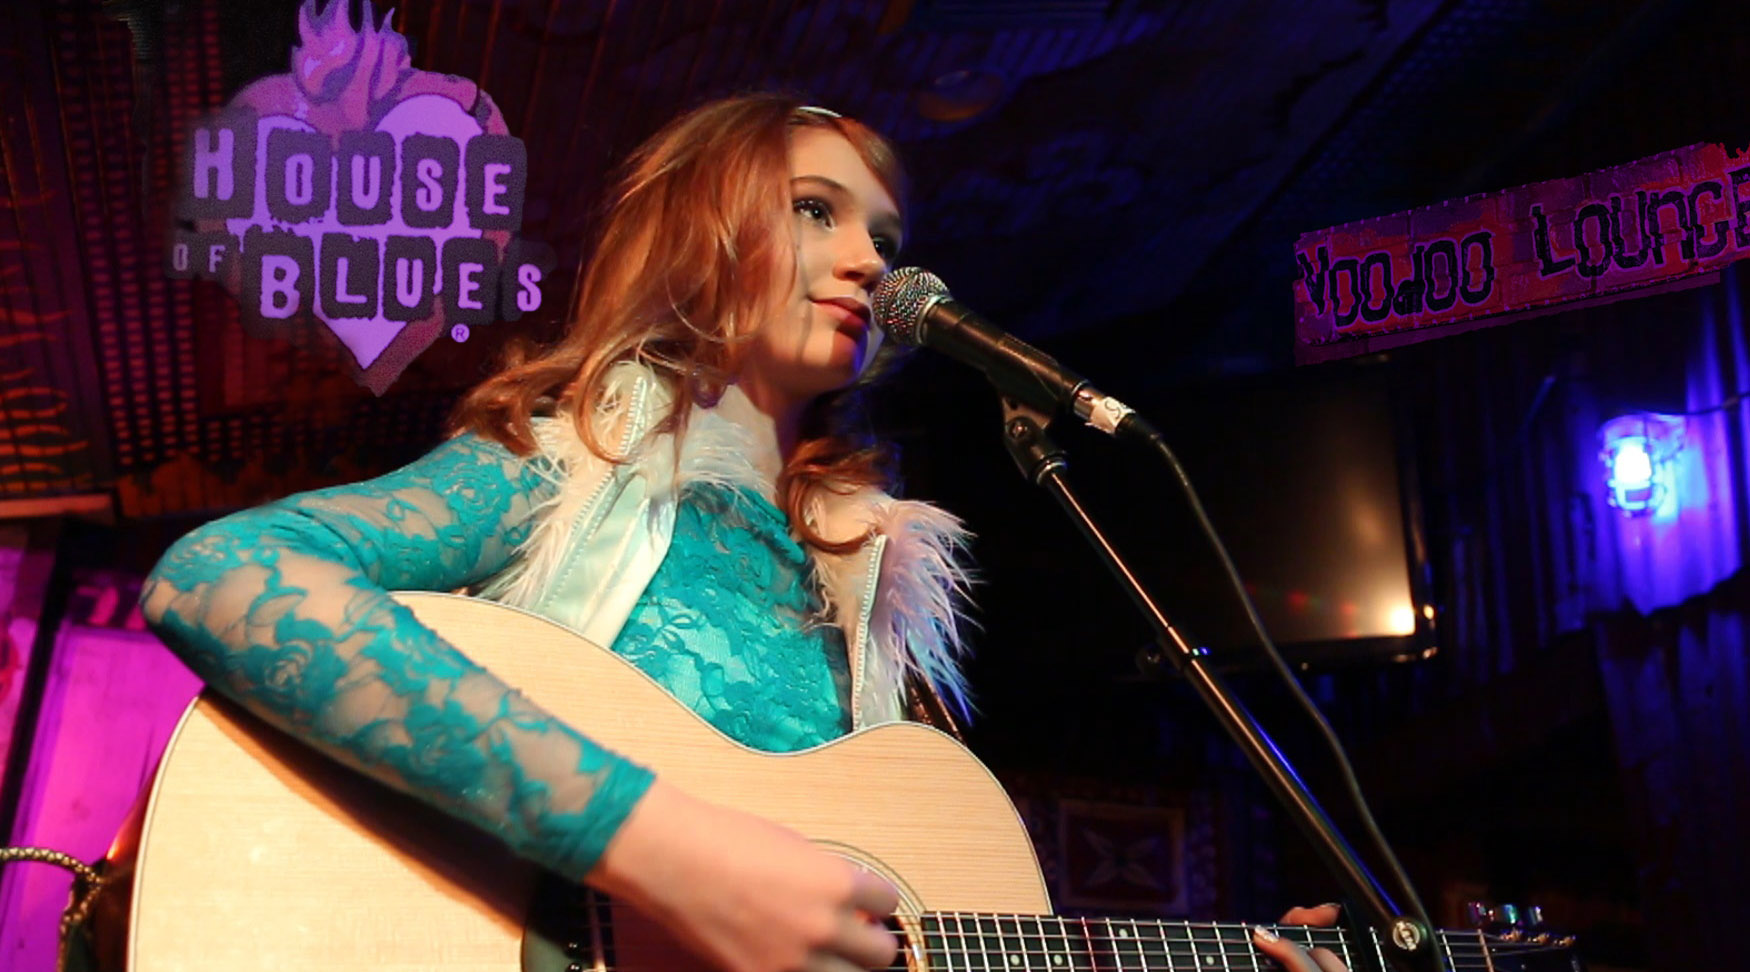 Serena Laurel performing at the House of Blues on Sunset Strip in Hollywood.